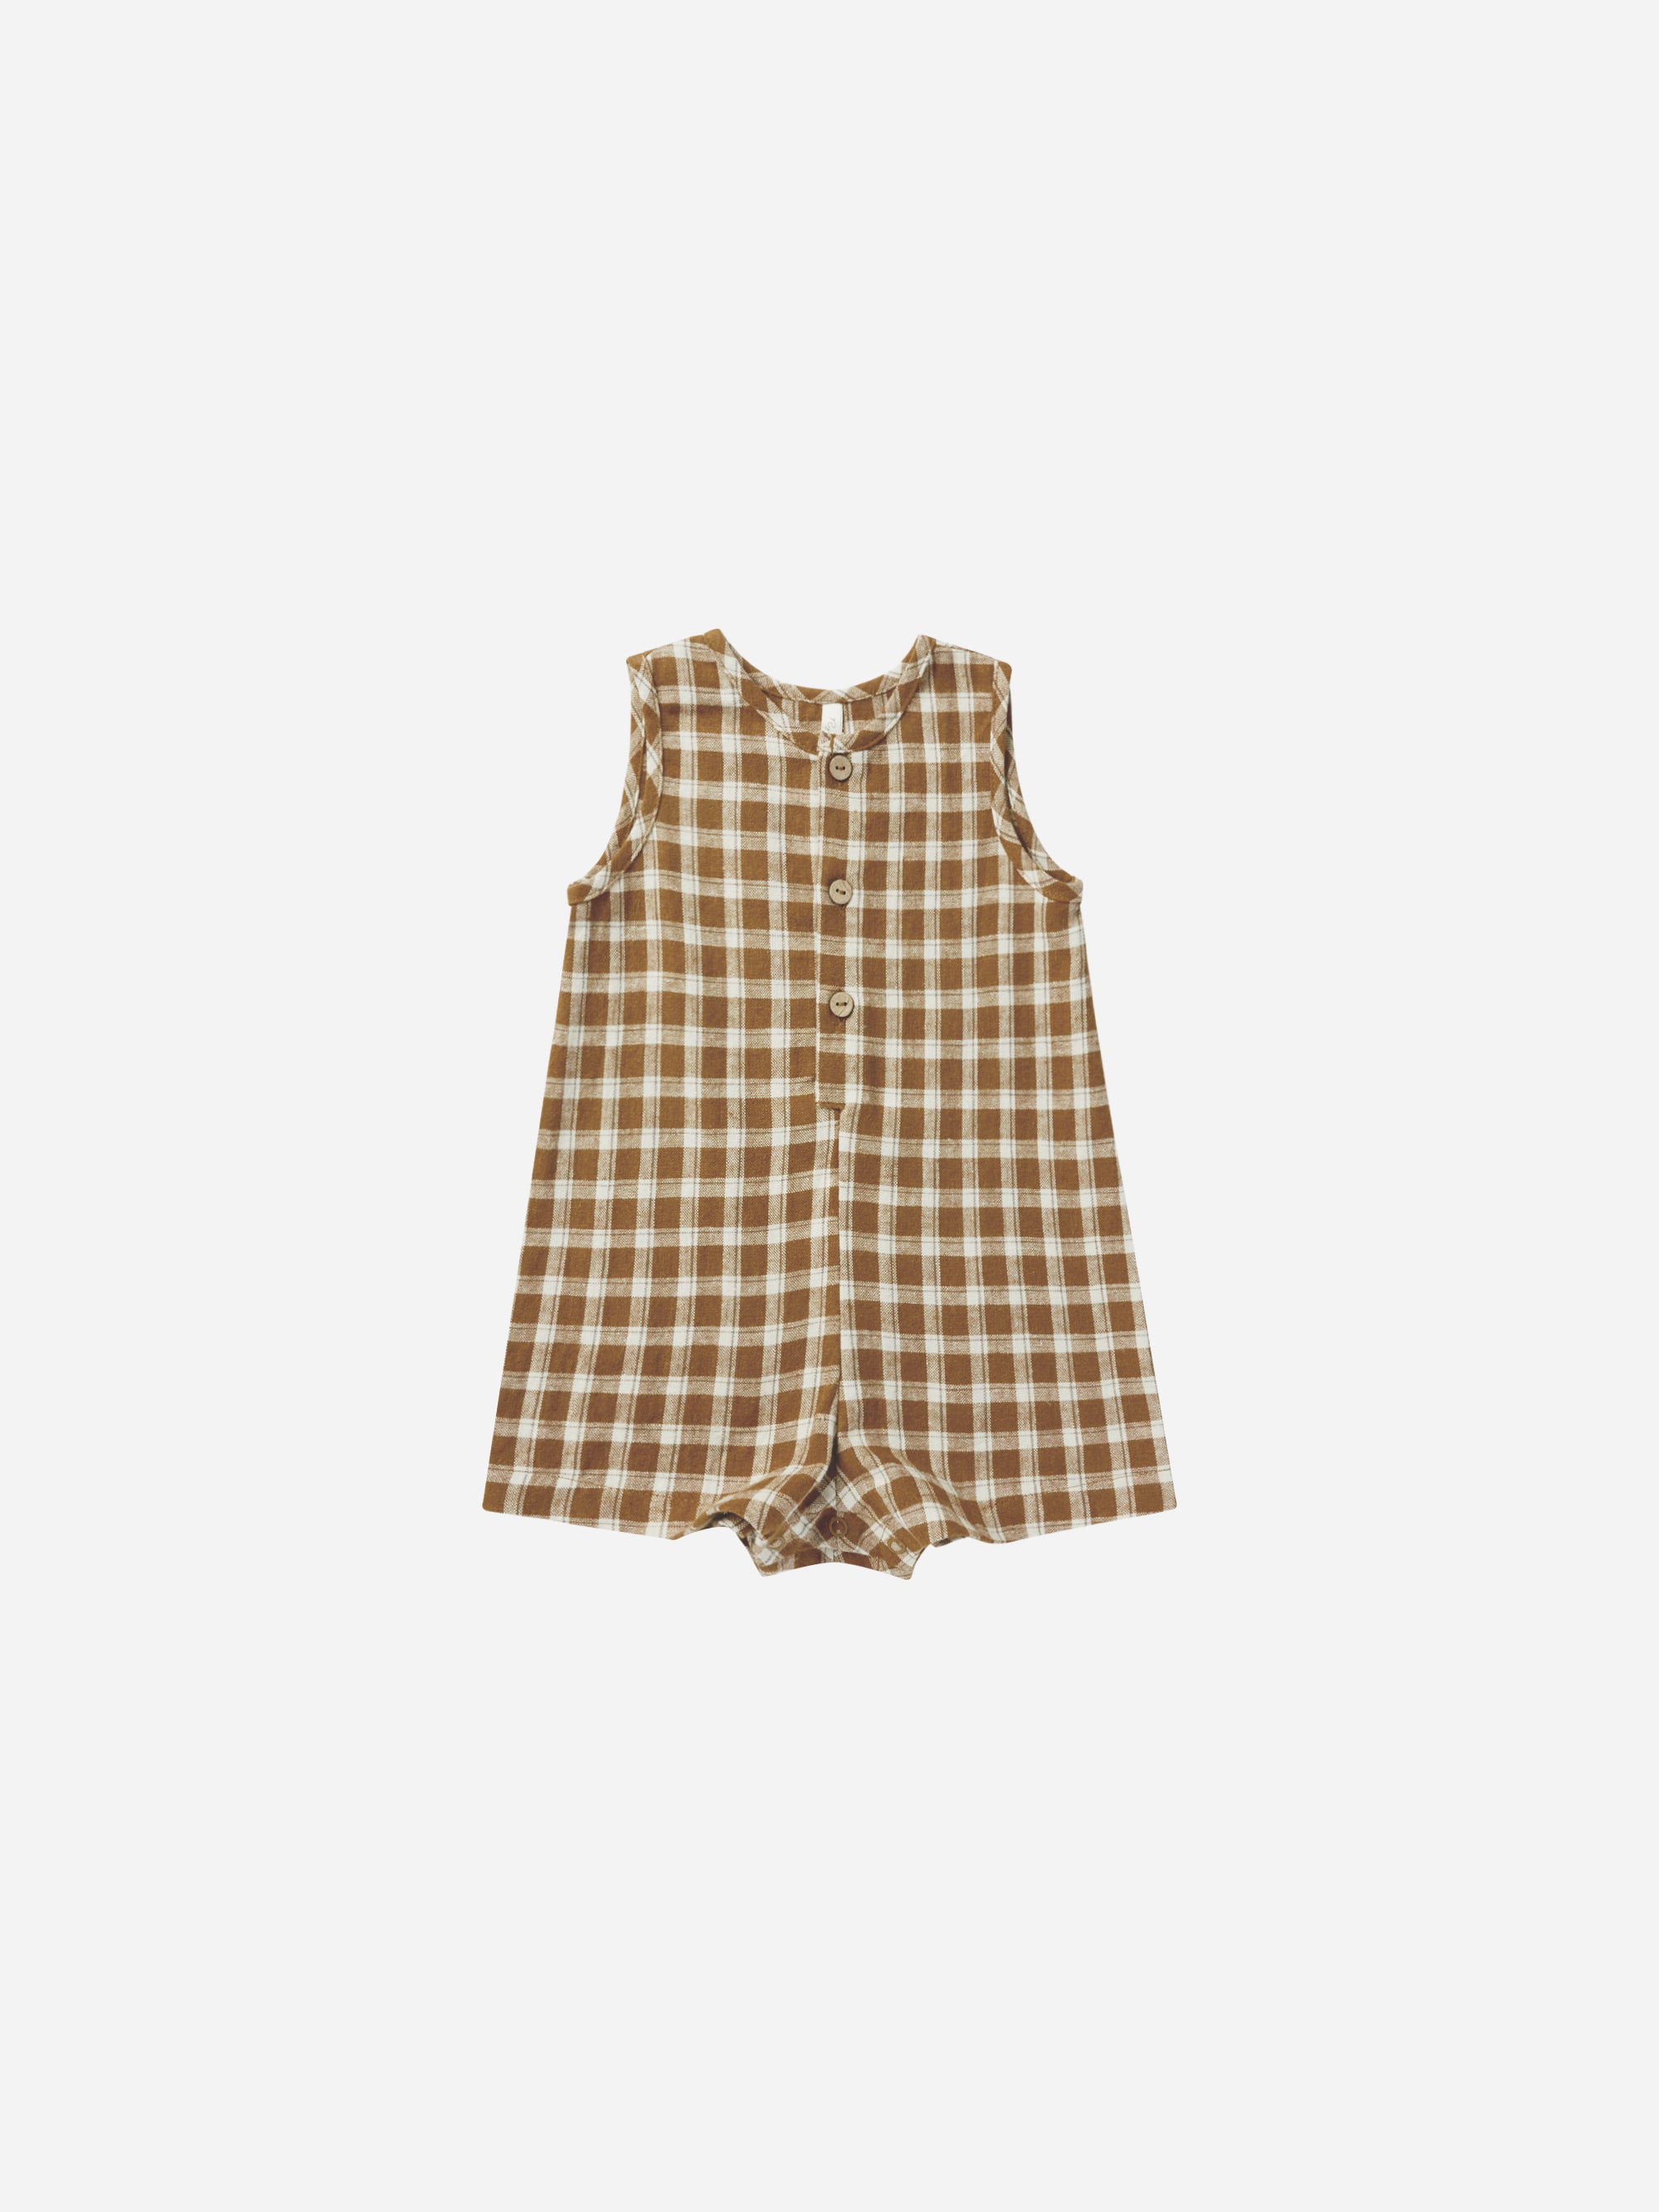 Maverick Romper || Saddle Plaid - Rylee + Cru | Kids Clothes | Trendy Baby Clothes | Modern Infant Outfits |